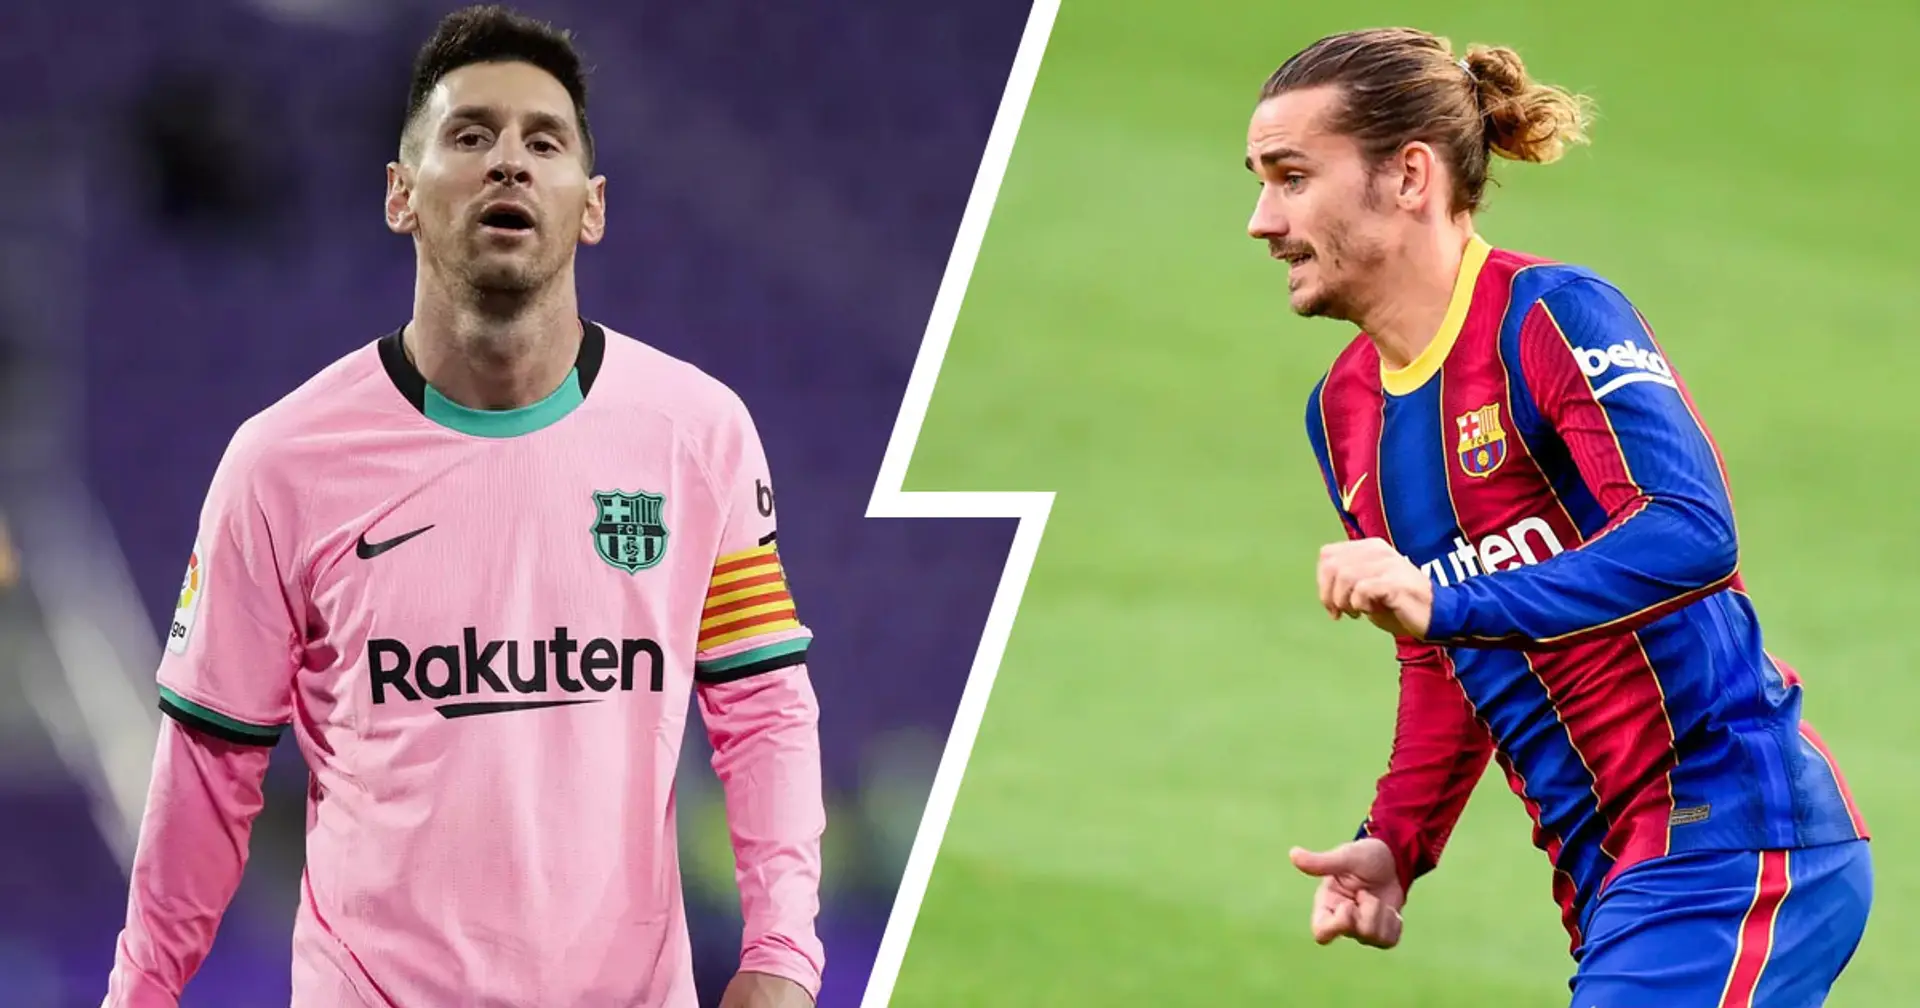 Stats show this season's Messi and Griezmann rank among worst Barca players in terms of conversion rate over last 11 years